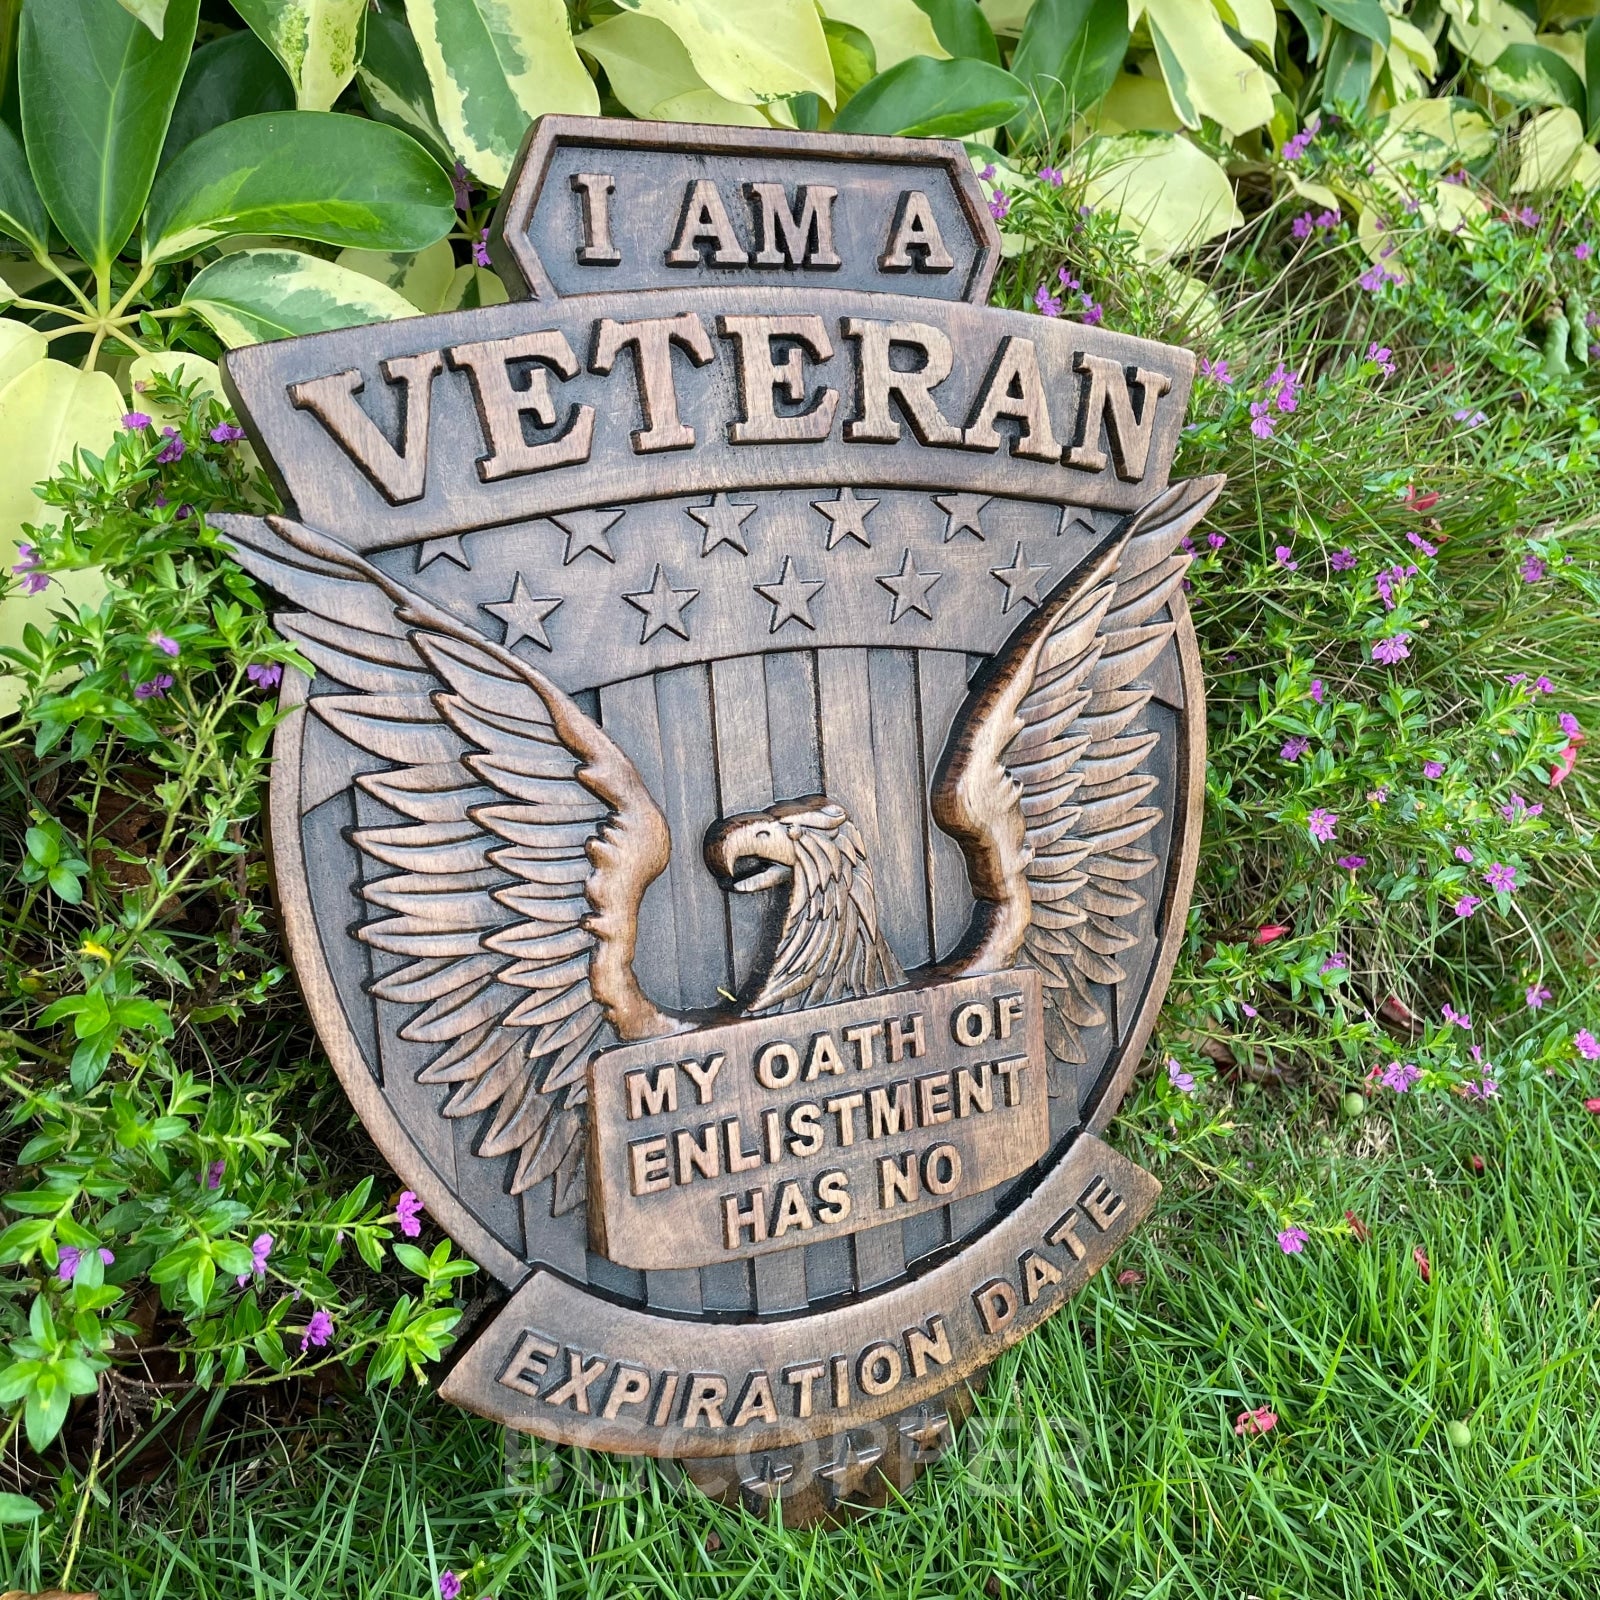 I Am a Veteran Wood Carving wall decoration - Best Veterans Day Gift